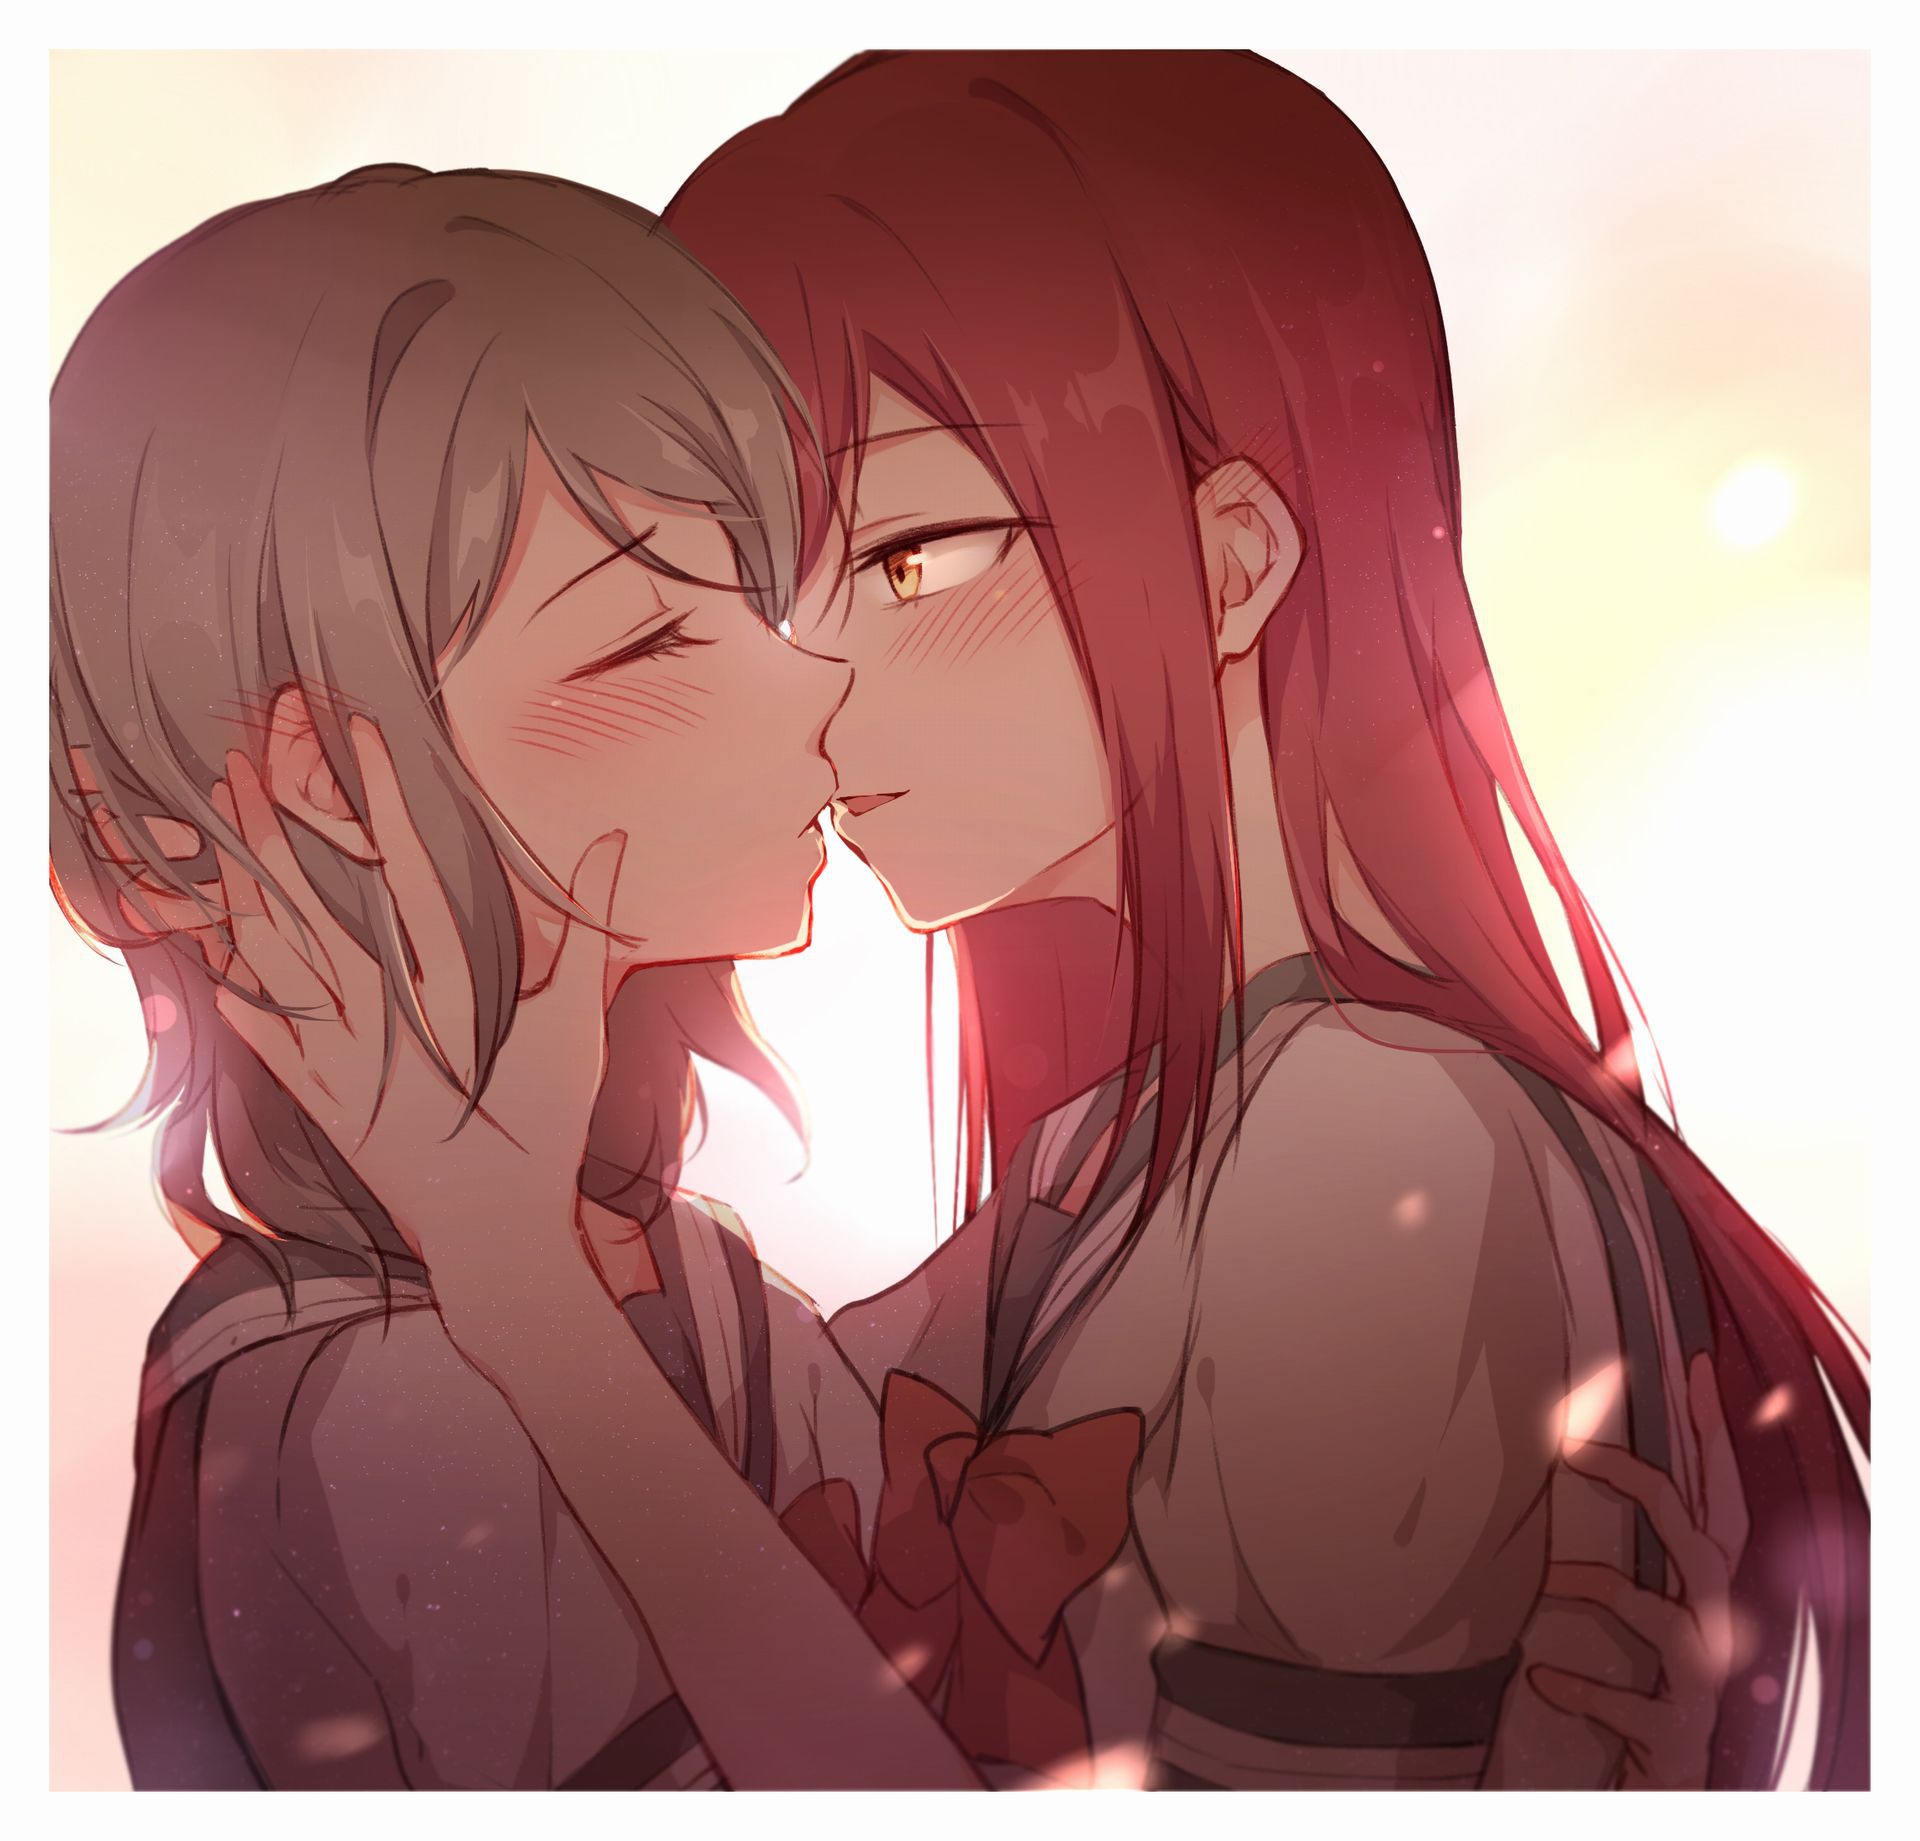 [secondary/ZIP] lovely yuri Lesbian image of a cute girl each other 36